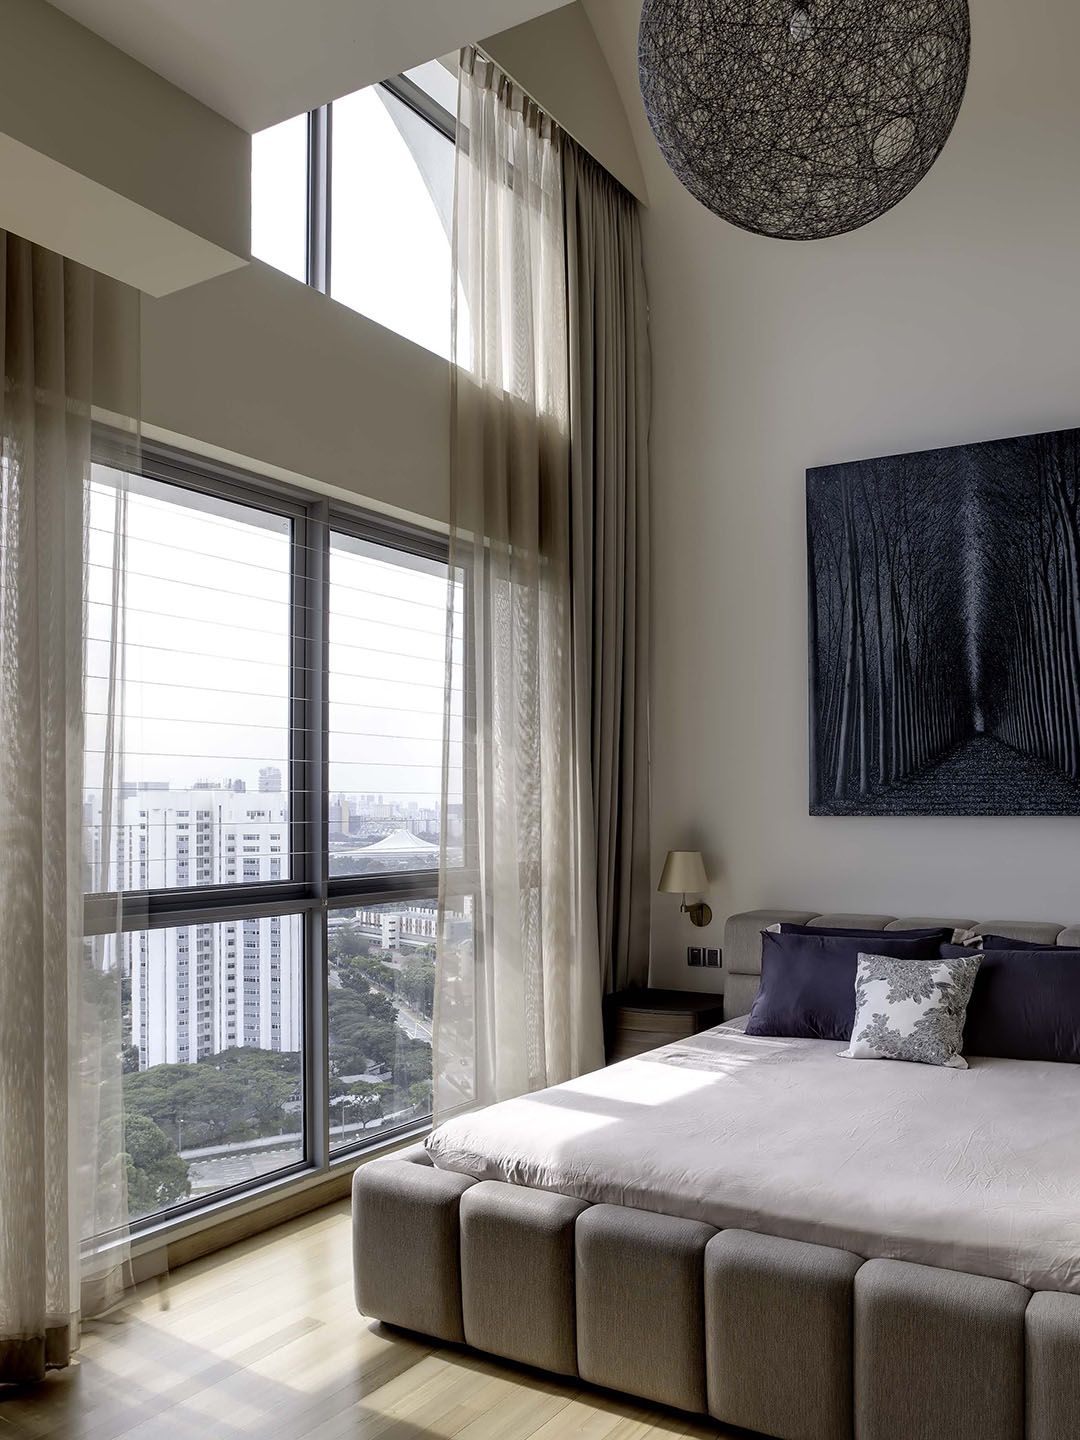 Motorised curtains in a bedroom with high ceiling in a Singapore condo apartment